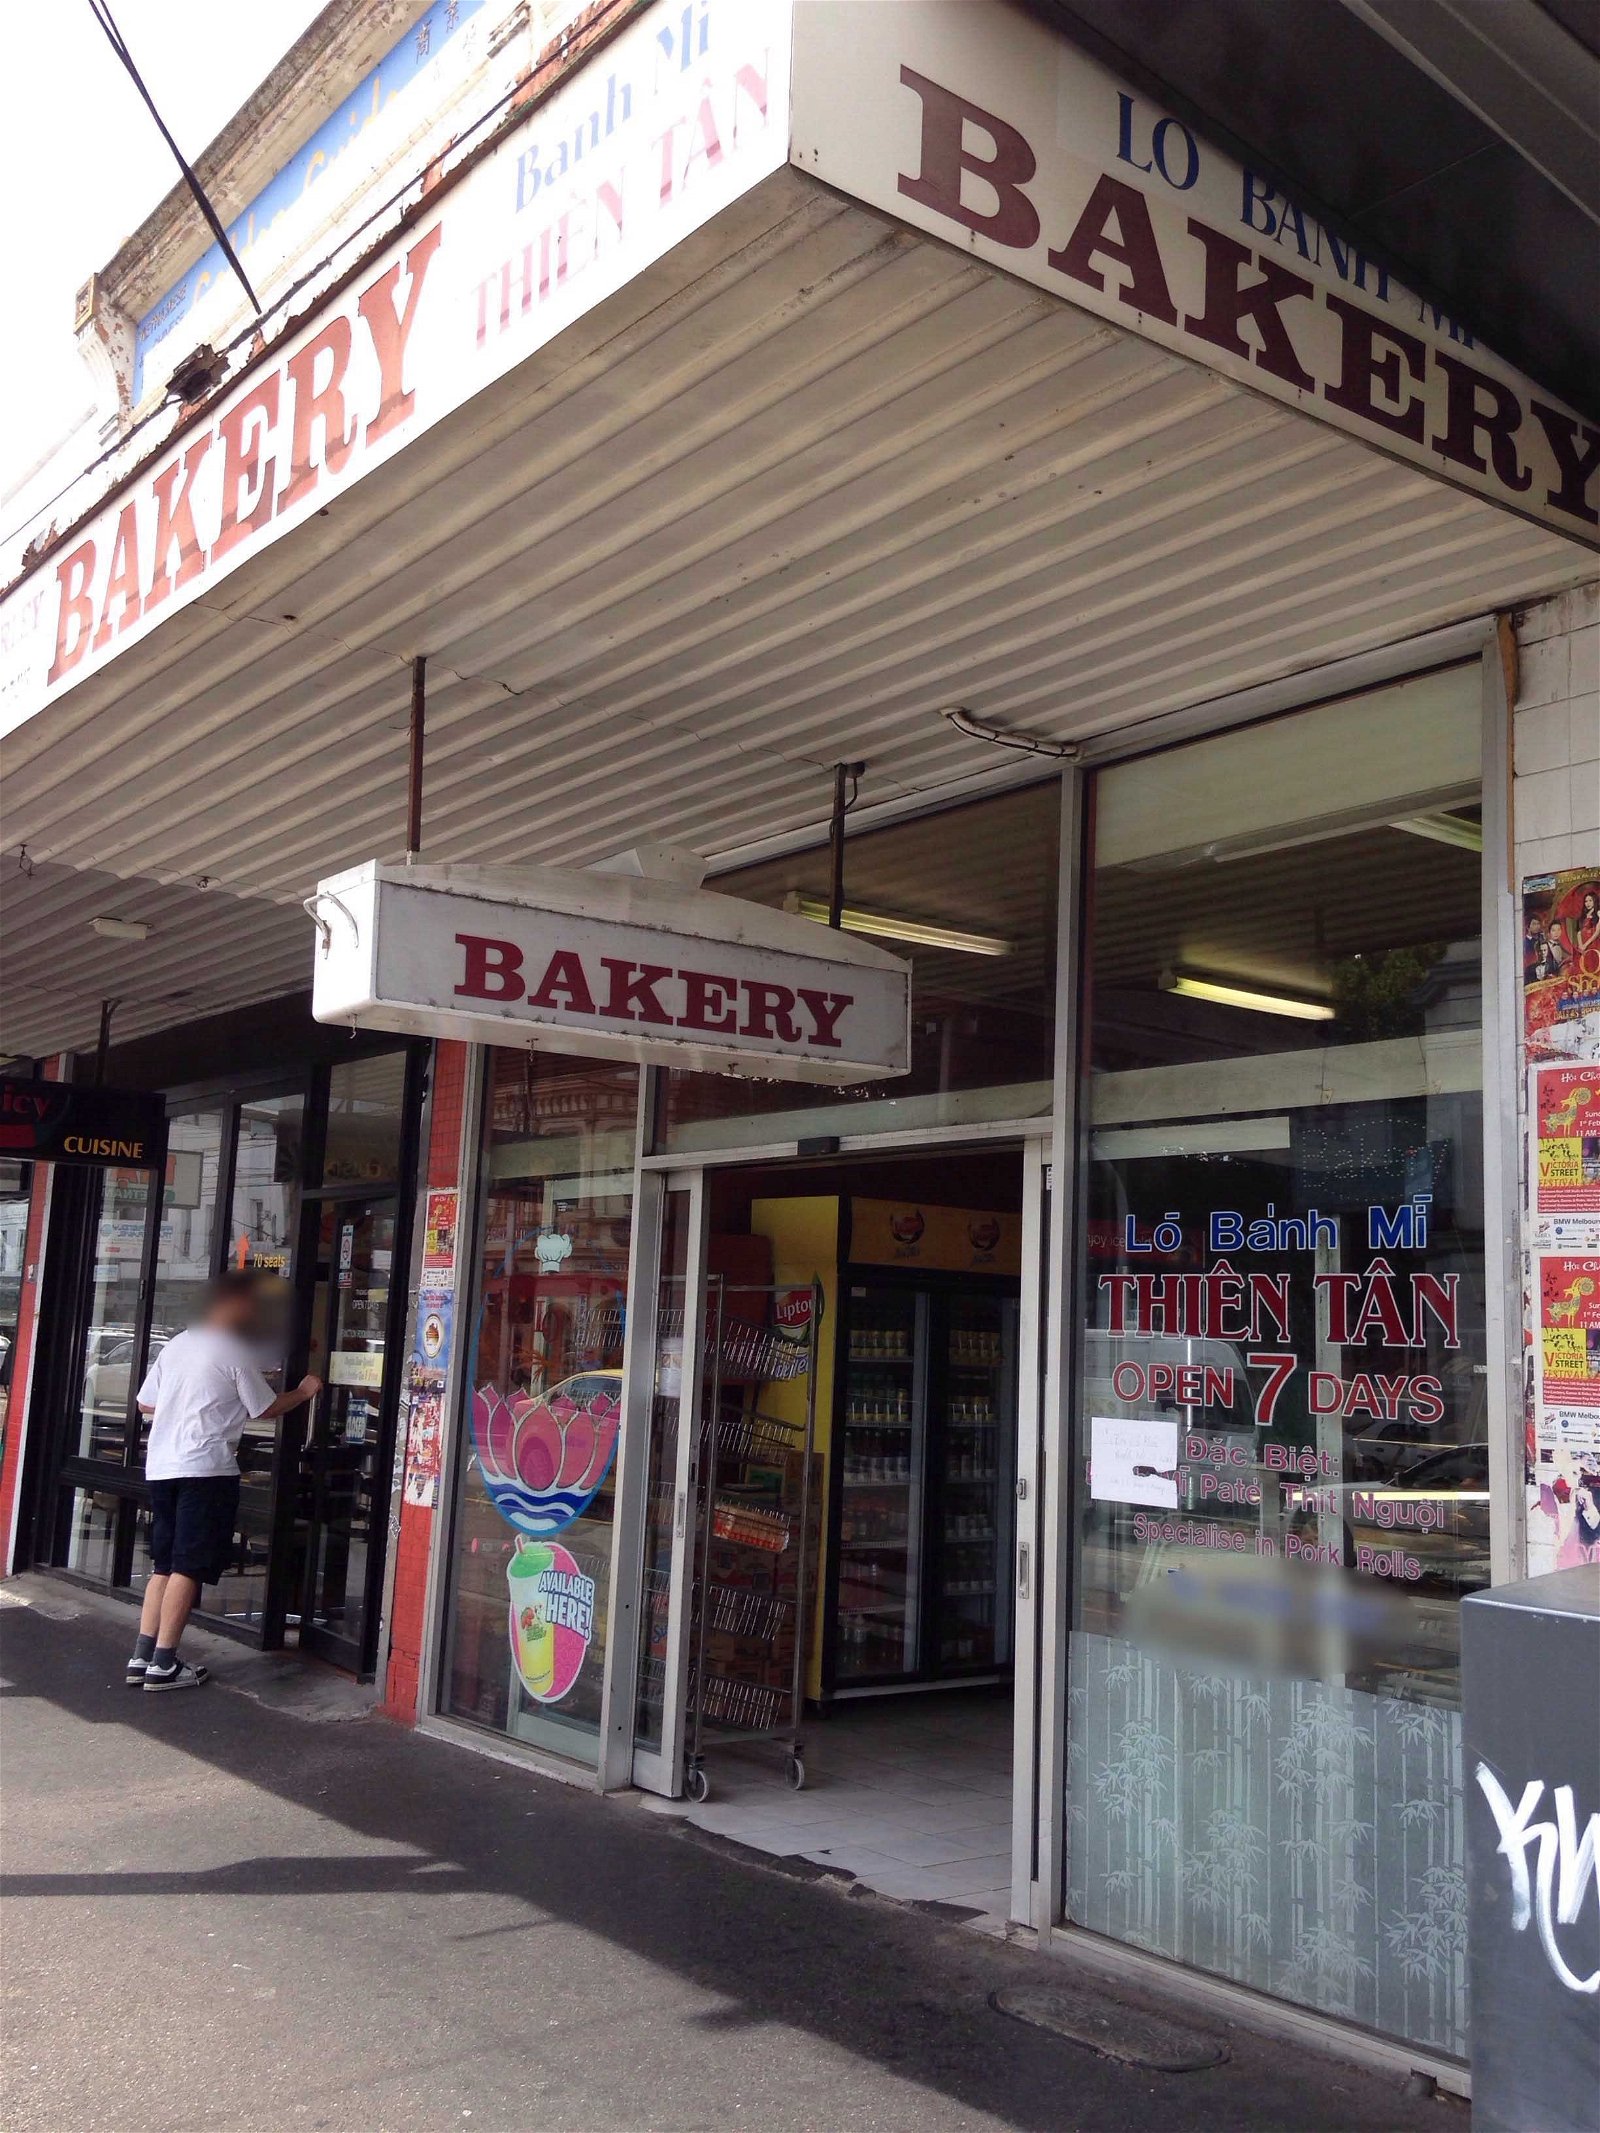 Harley Bakery - Northern Rivers Accommodation